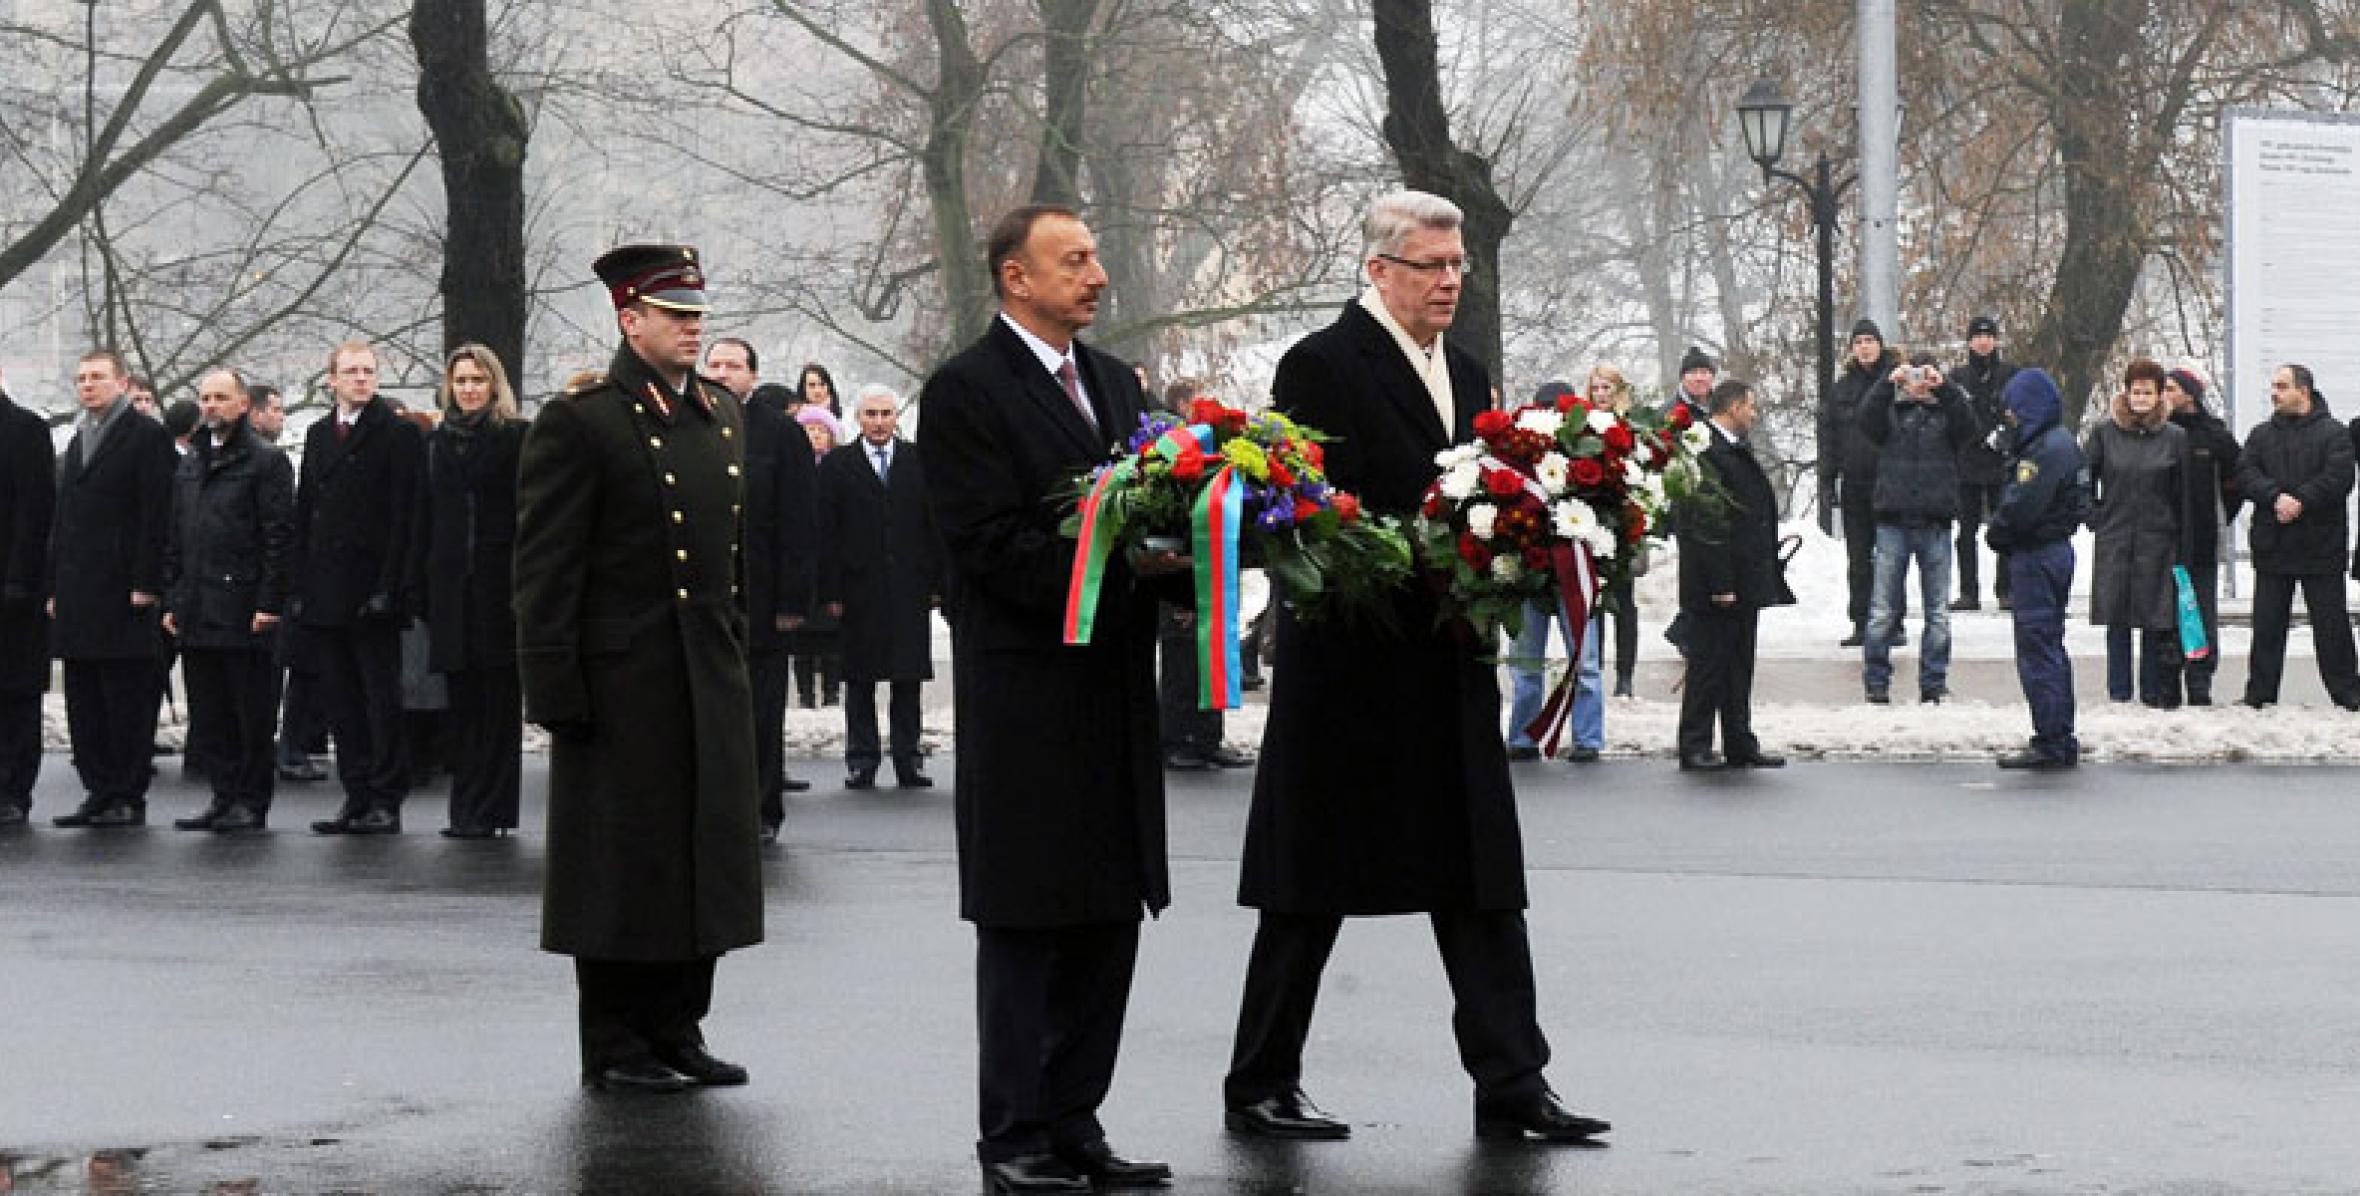 Ilham Aliyev visited the “Freedom” monument in Riga